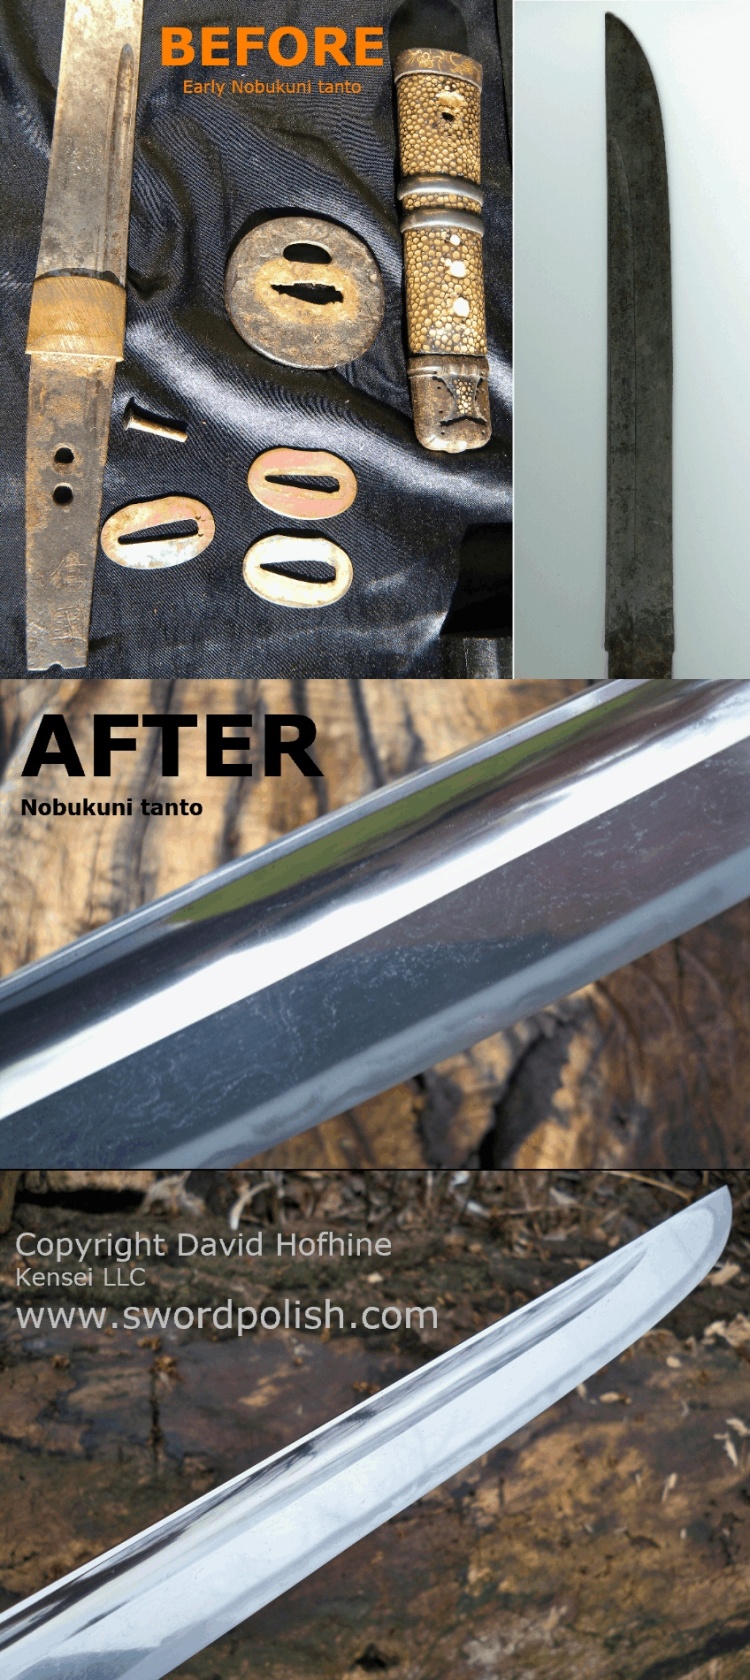 Nobukuni tanto before and after